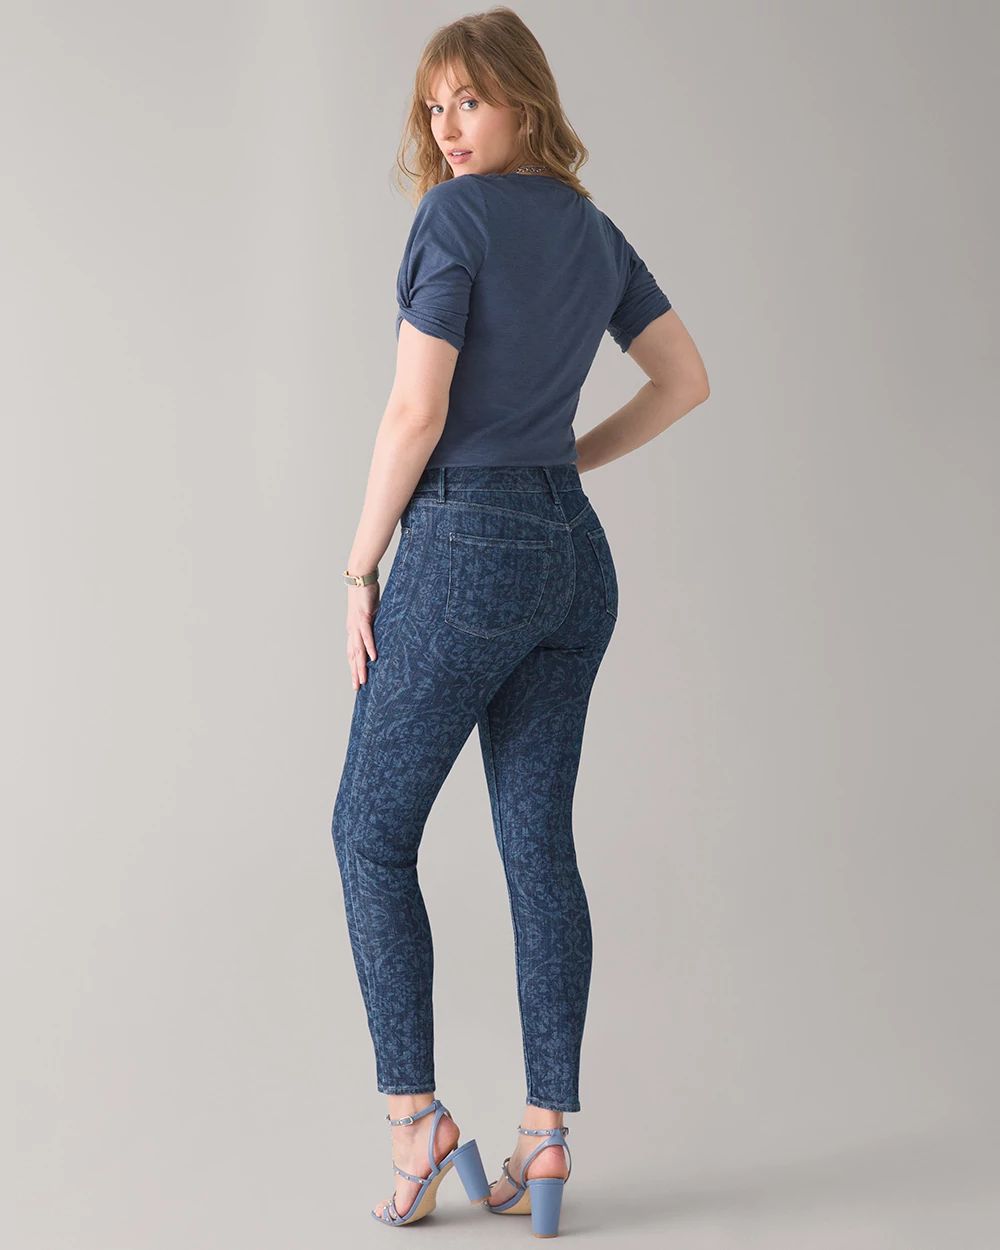 Curvy Mid-Rise Everyday Soft Denim  Damask Print Skinny Jeans click to view larger image.